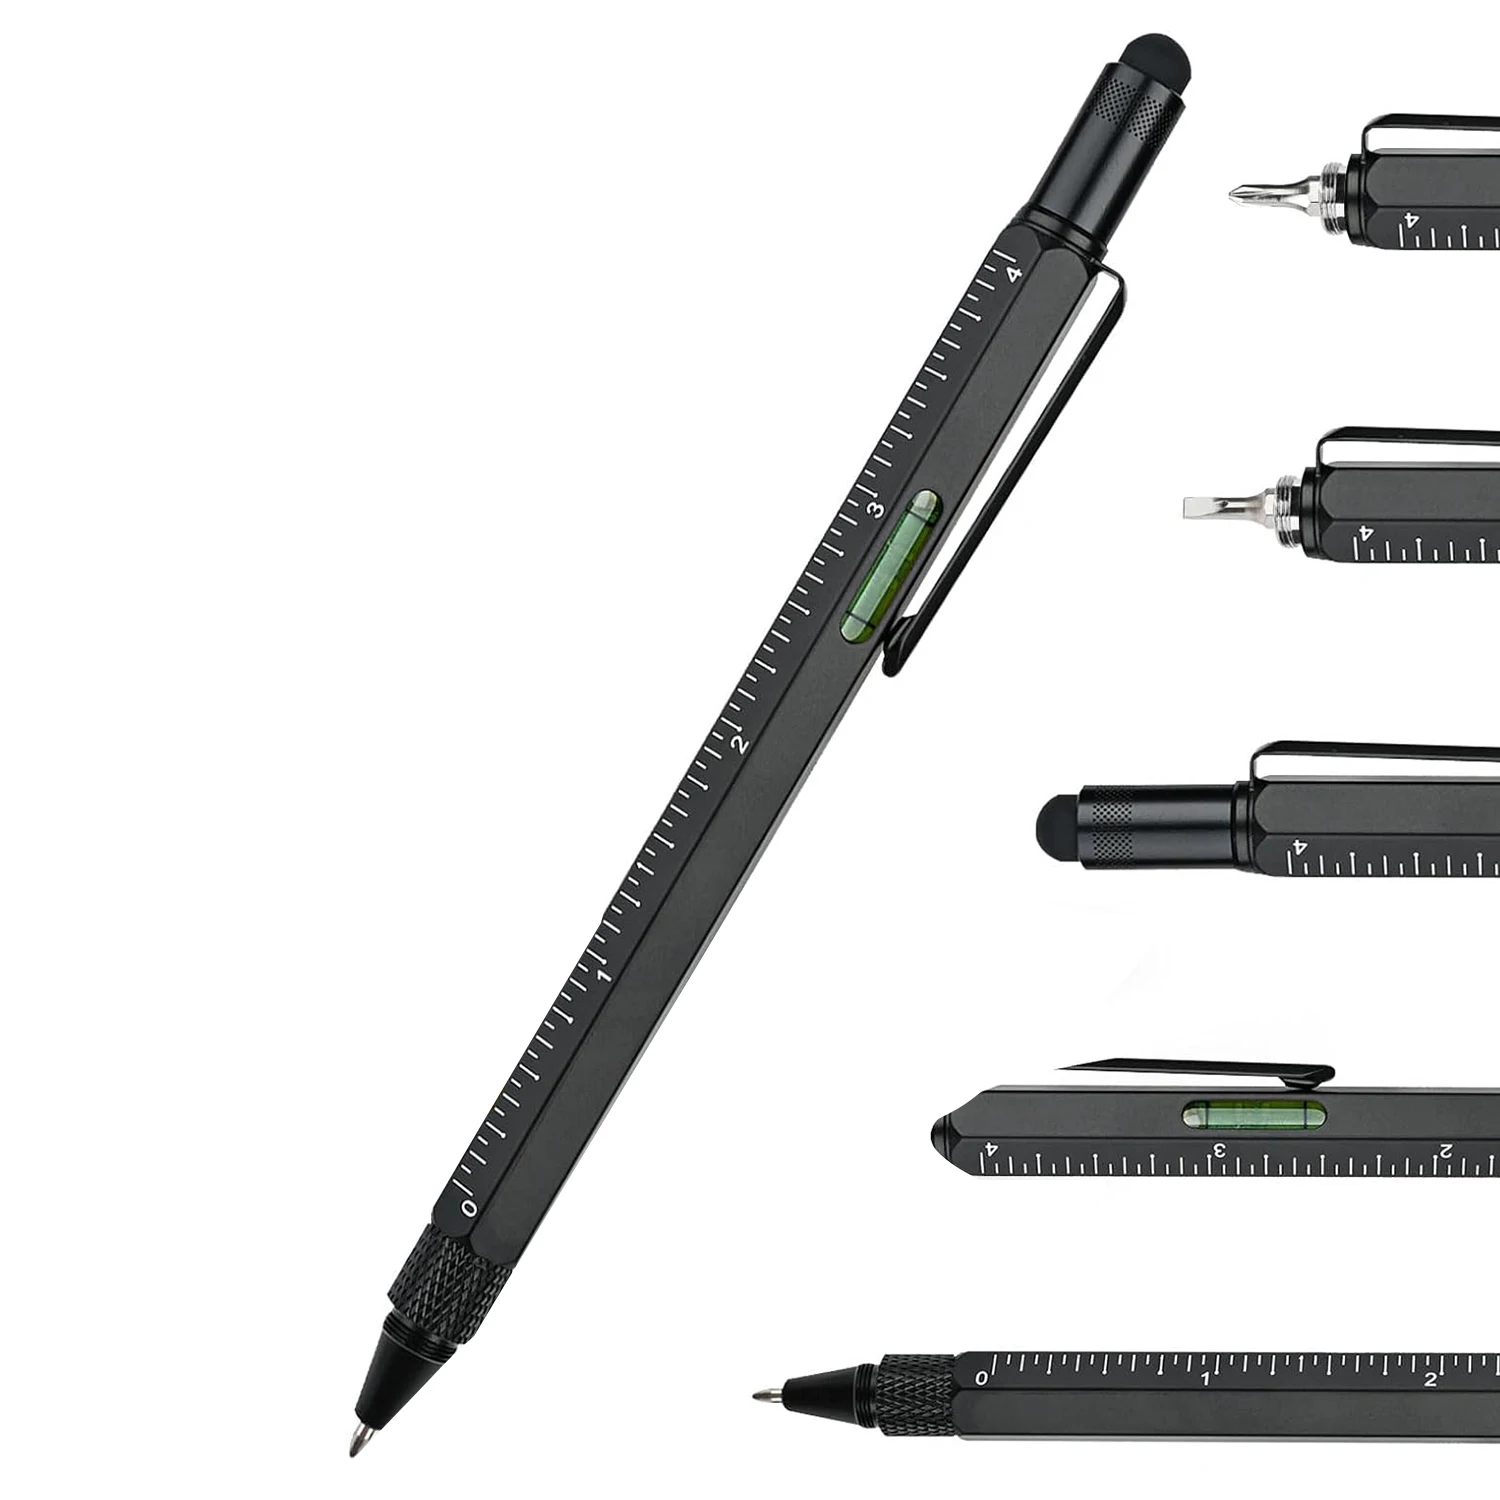 

Multitool Pen Cool Gadgets, Novelty Pen with Stylus, Level, Rulers, Screwdrivers, Birthday Gifts for Dad Husband Black